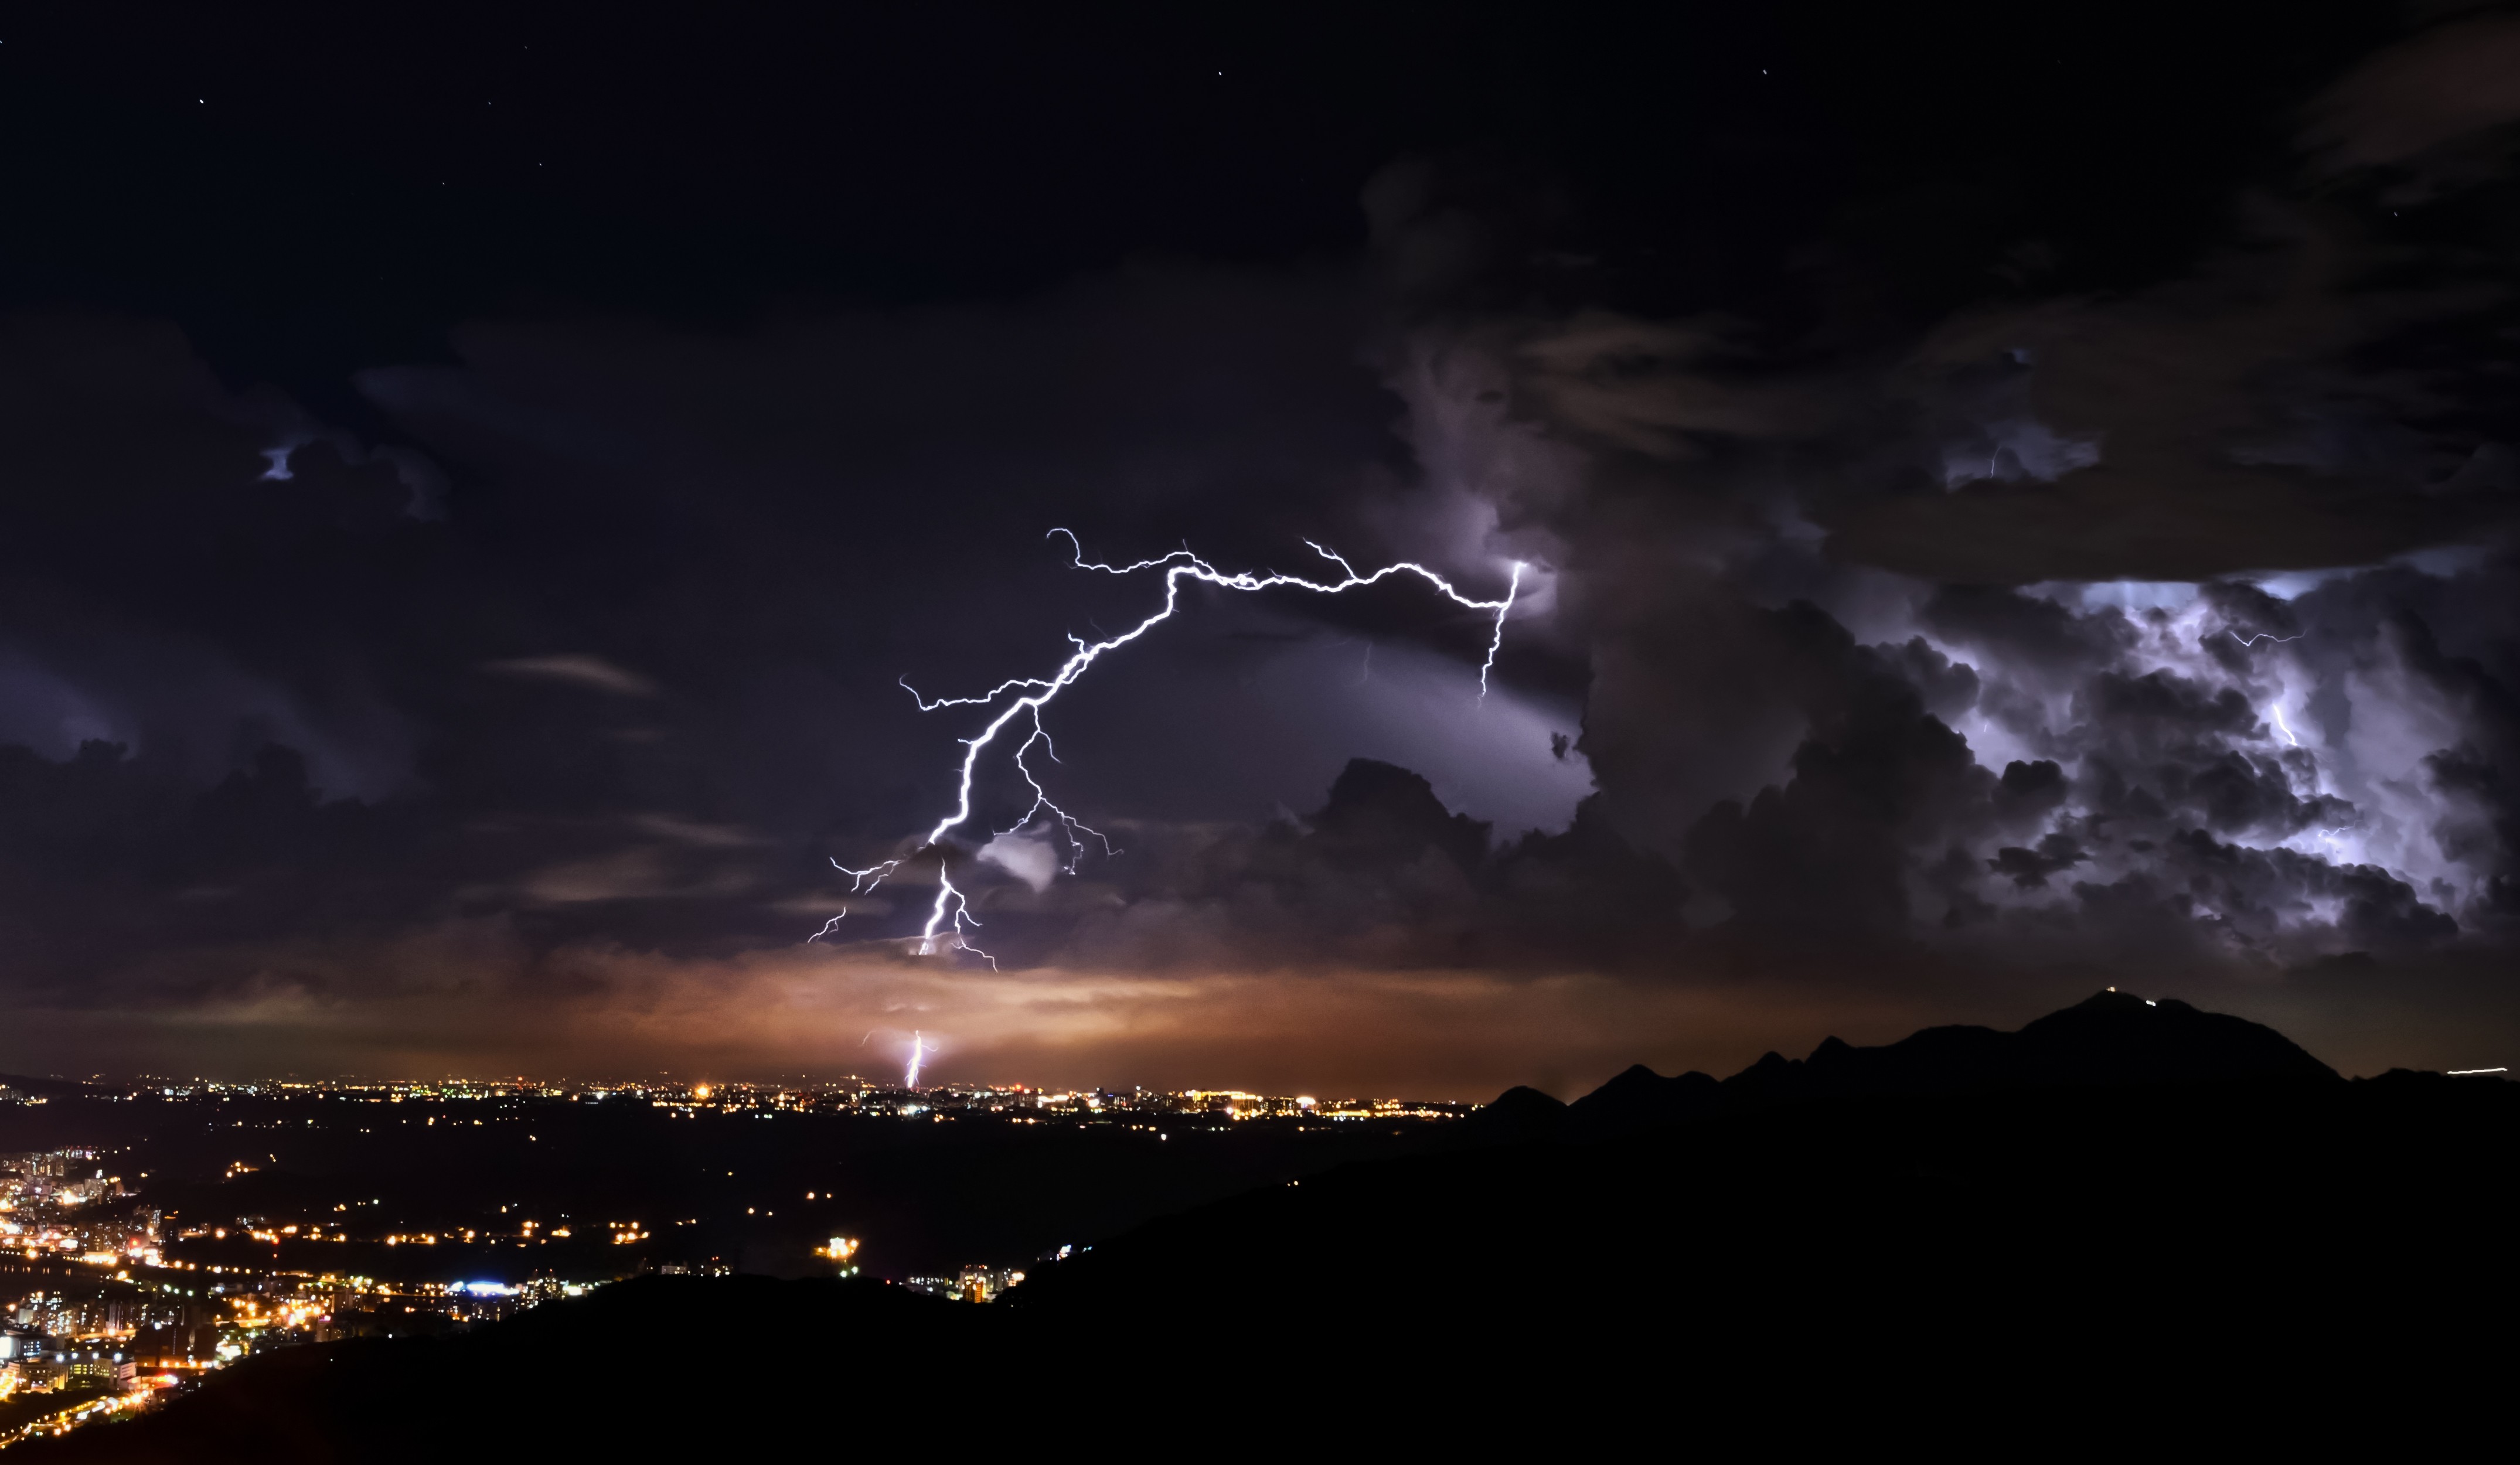 General 4300x2500 nature landscape clouds lightning night storm cityscape city lights mountains silhouette